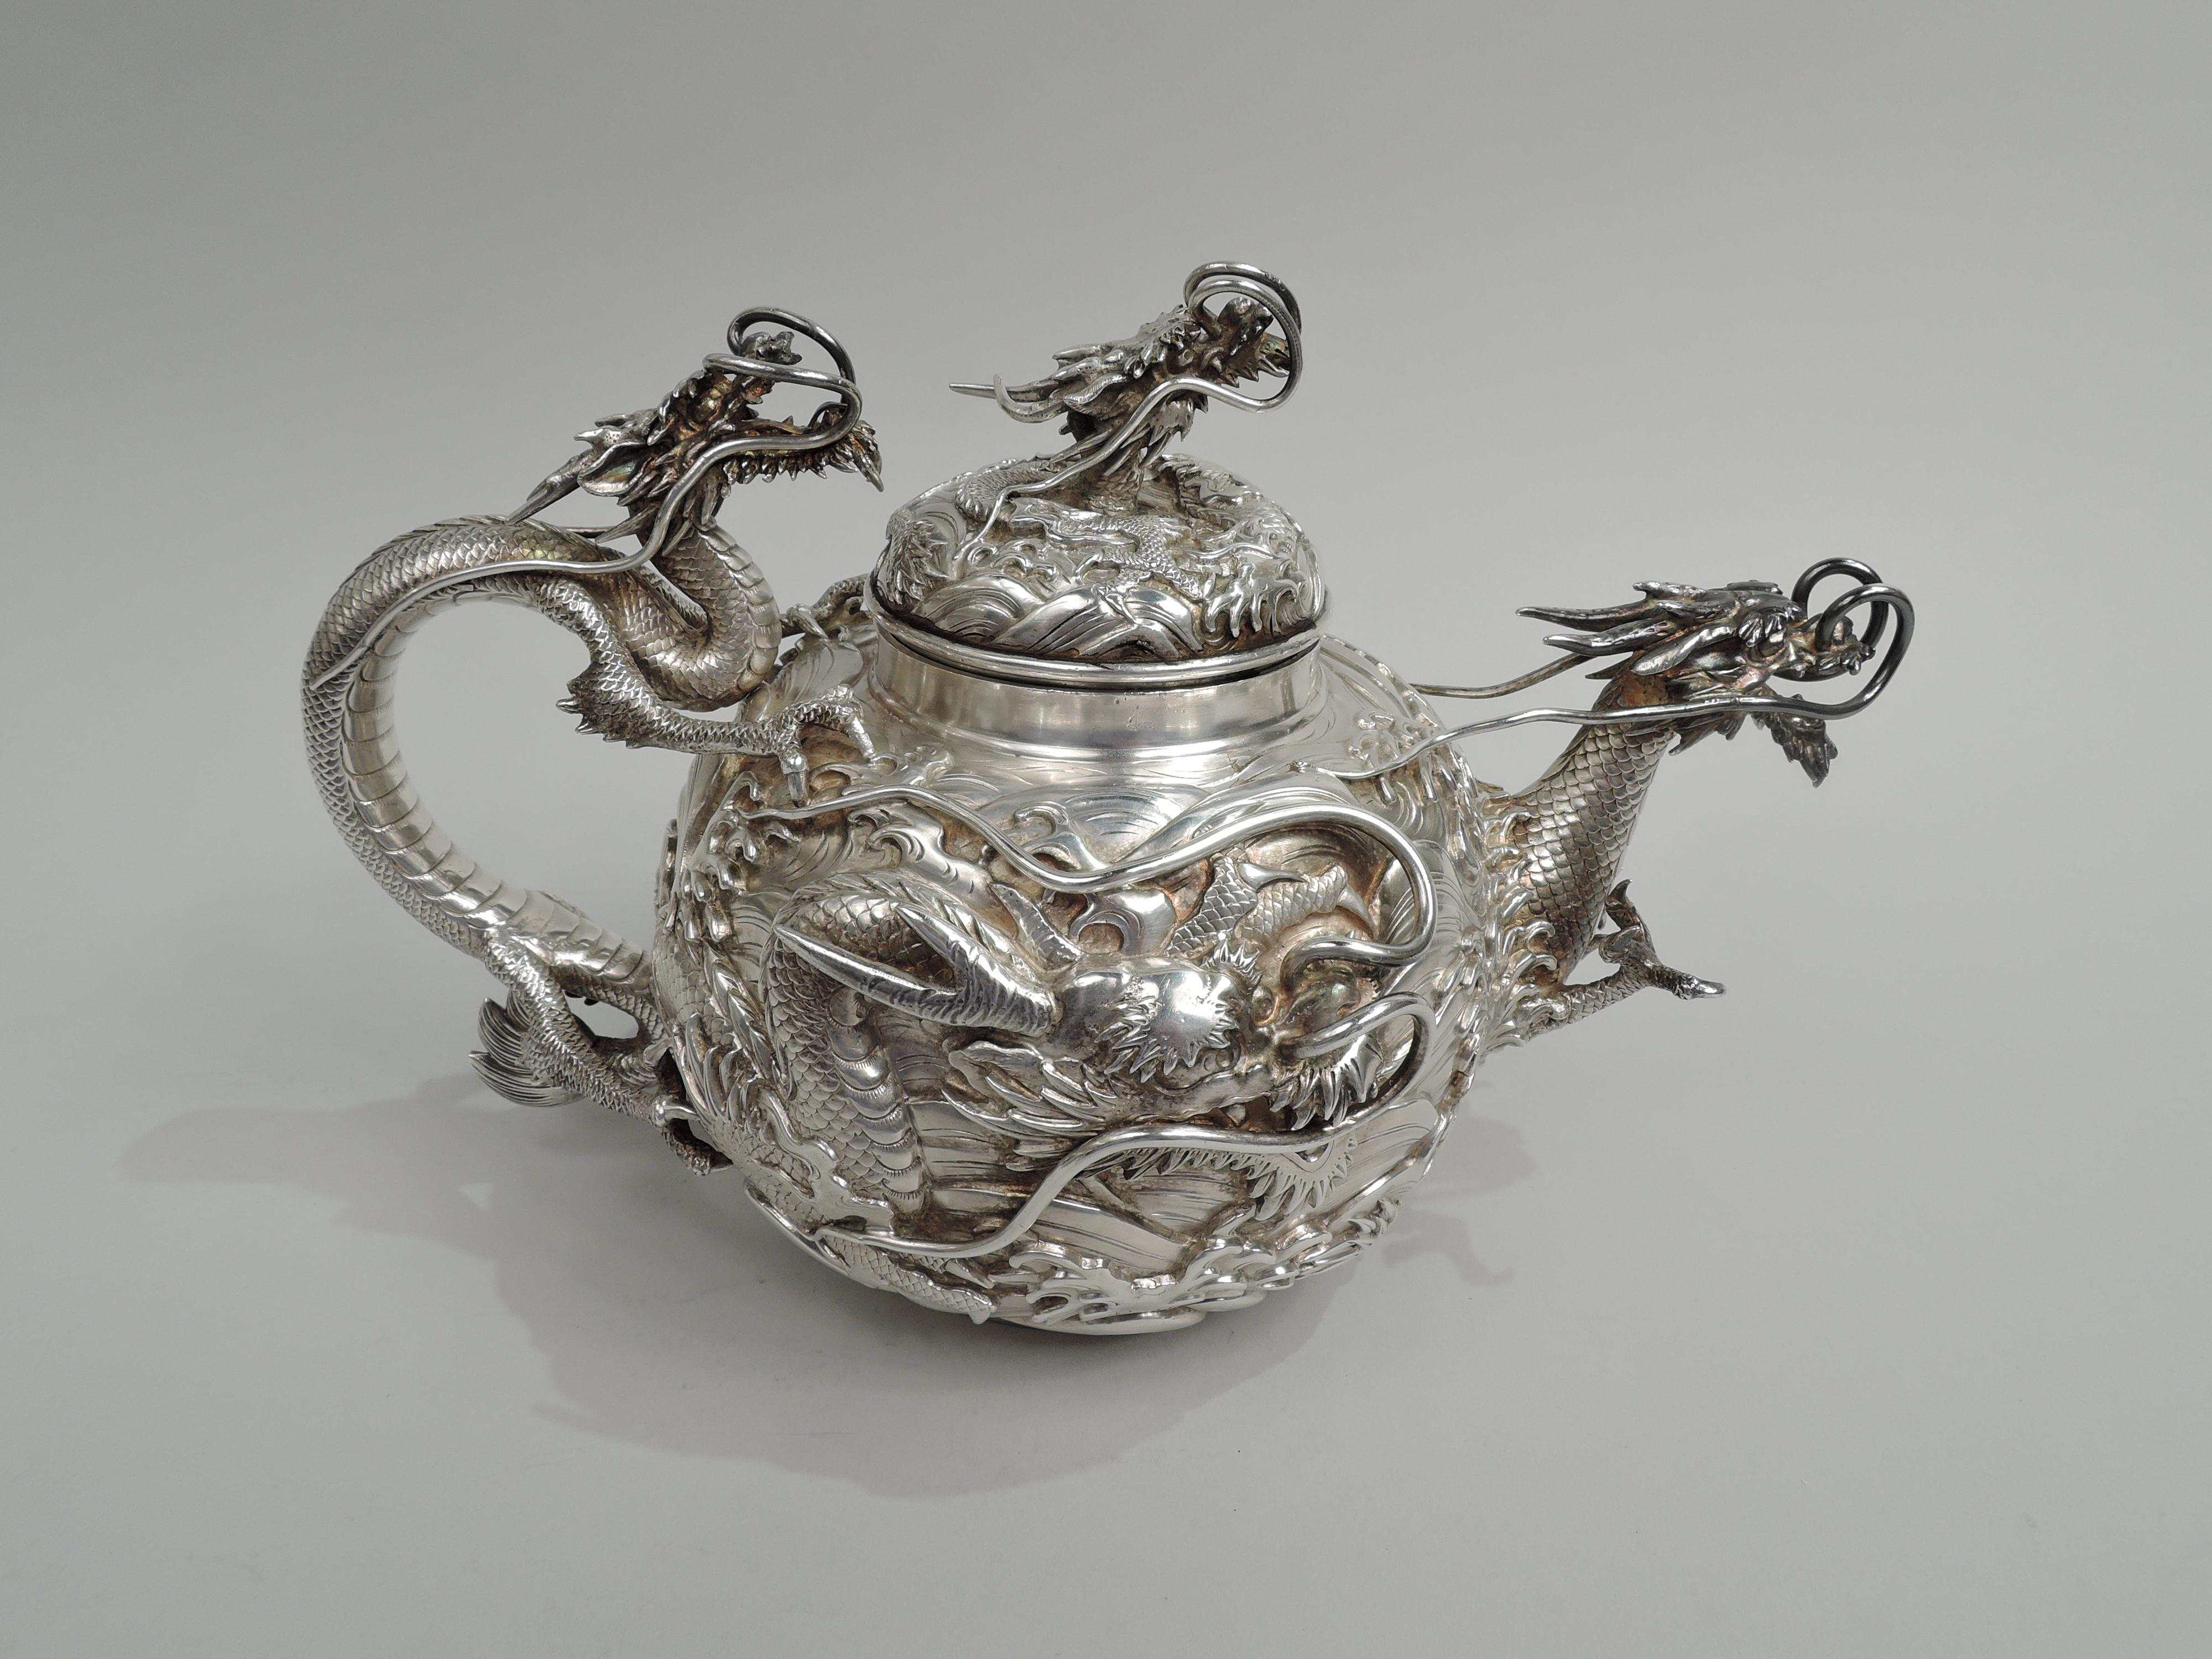 Fabulous Japanese silver teapot, ca 1890. Globular with dragons on roiling waves. Dragon handle with talon mounts. Spout same with projecting talons “puncturing” the surface. Raised cover with dragon head finial. A dramatic vessel with fierce, scaly